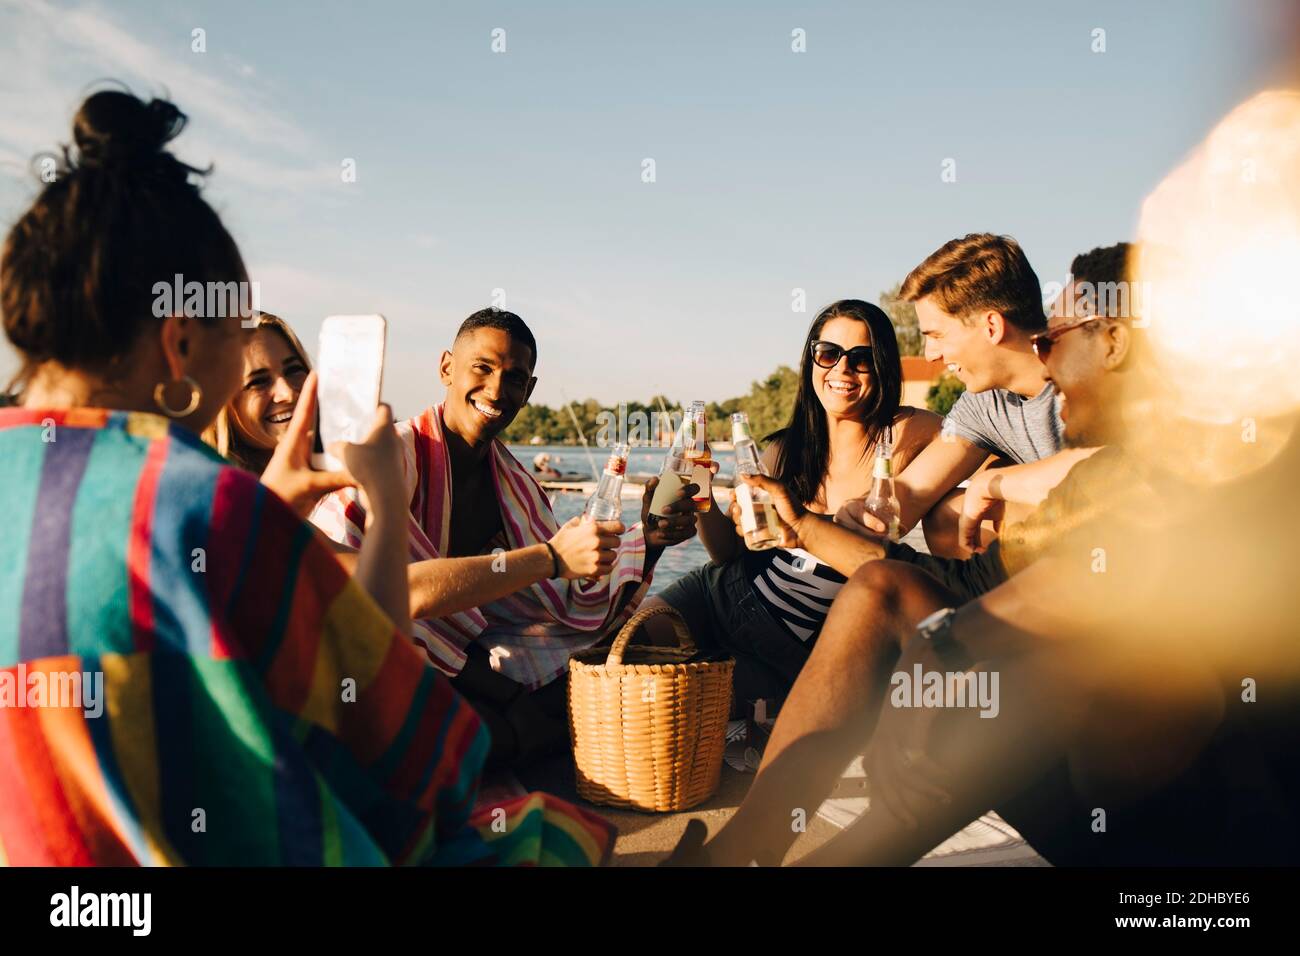 Woman photographing cheerful friends toasting drinks at jetty in summer Stock Photo